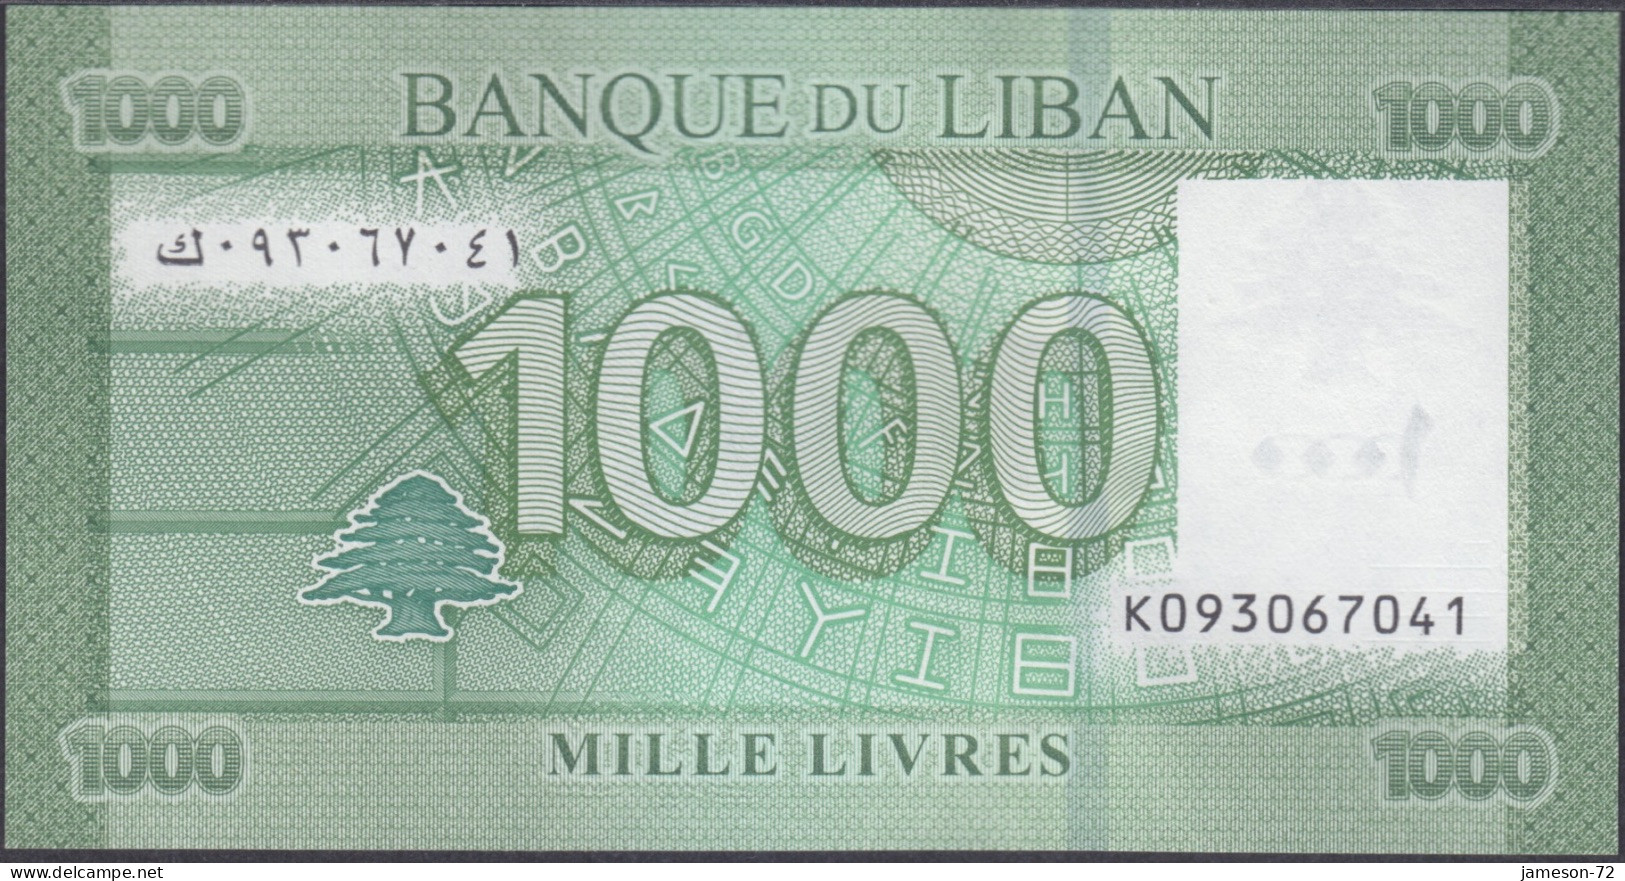 LEBANON - 1000 Livres 2016 P# 90c Middle East Banknote - Edelweiss Coins - Libano